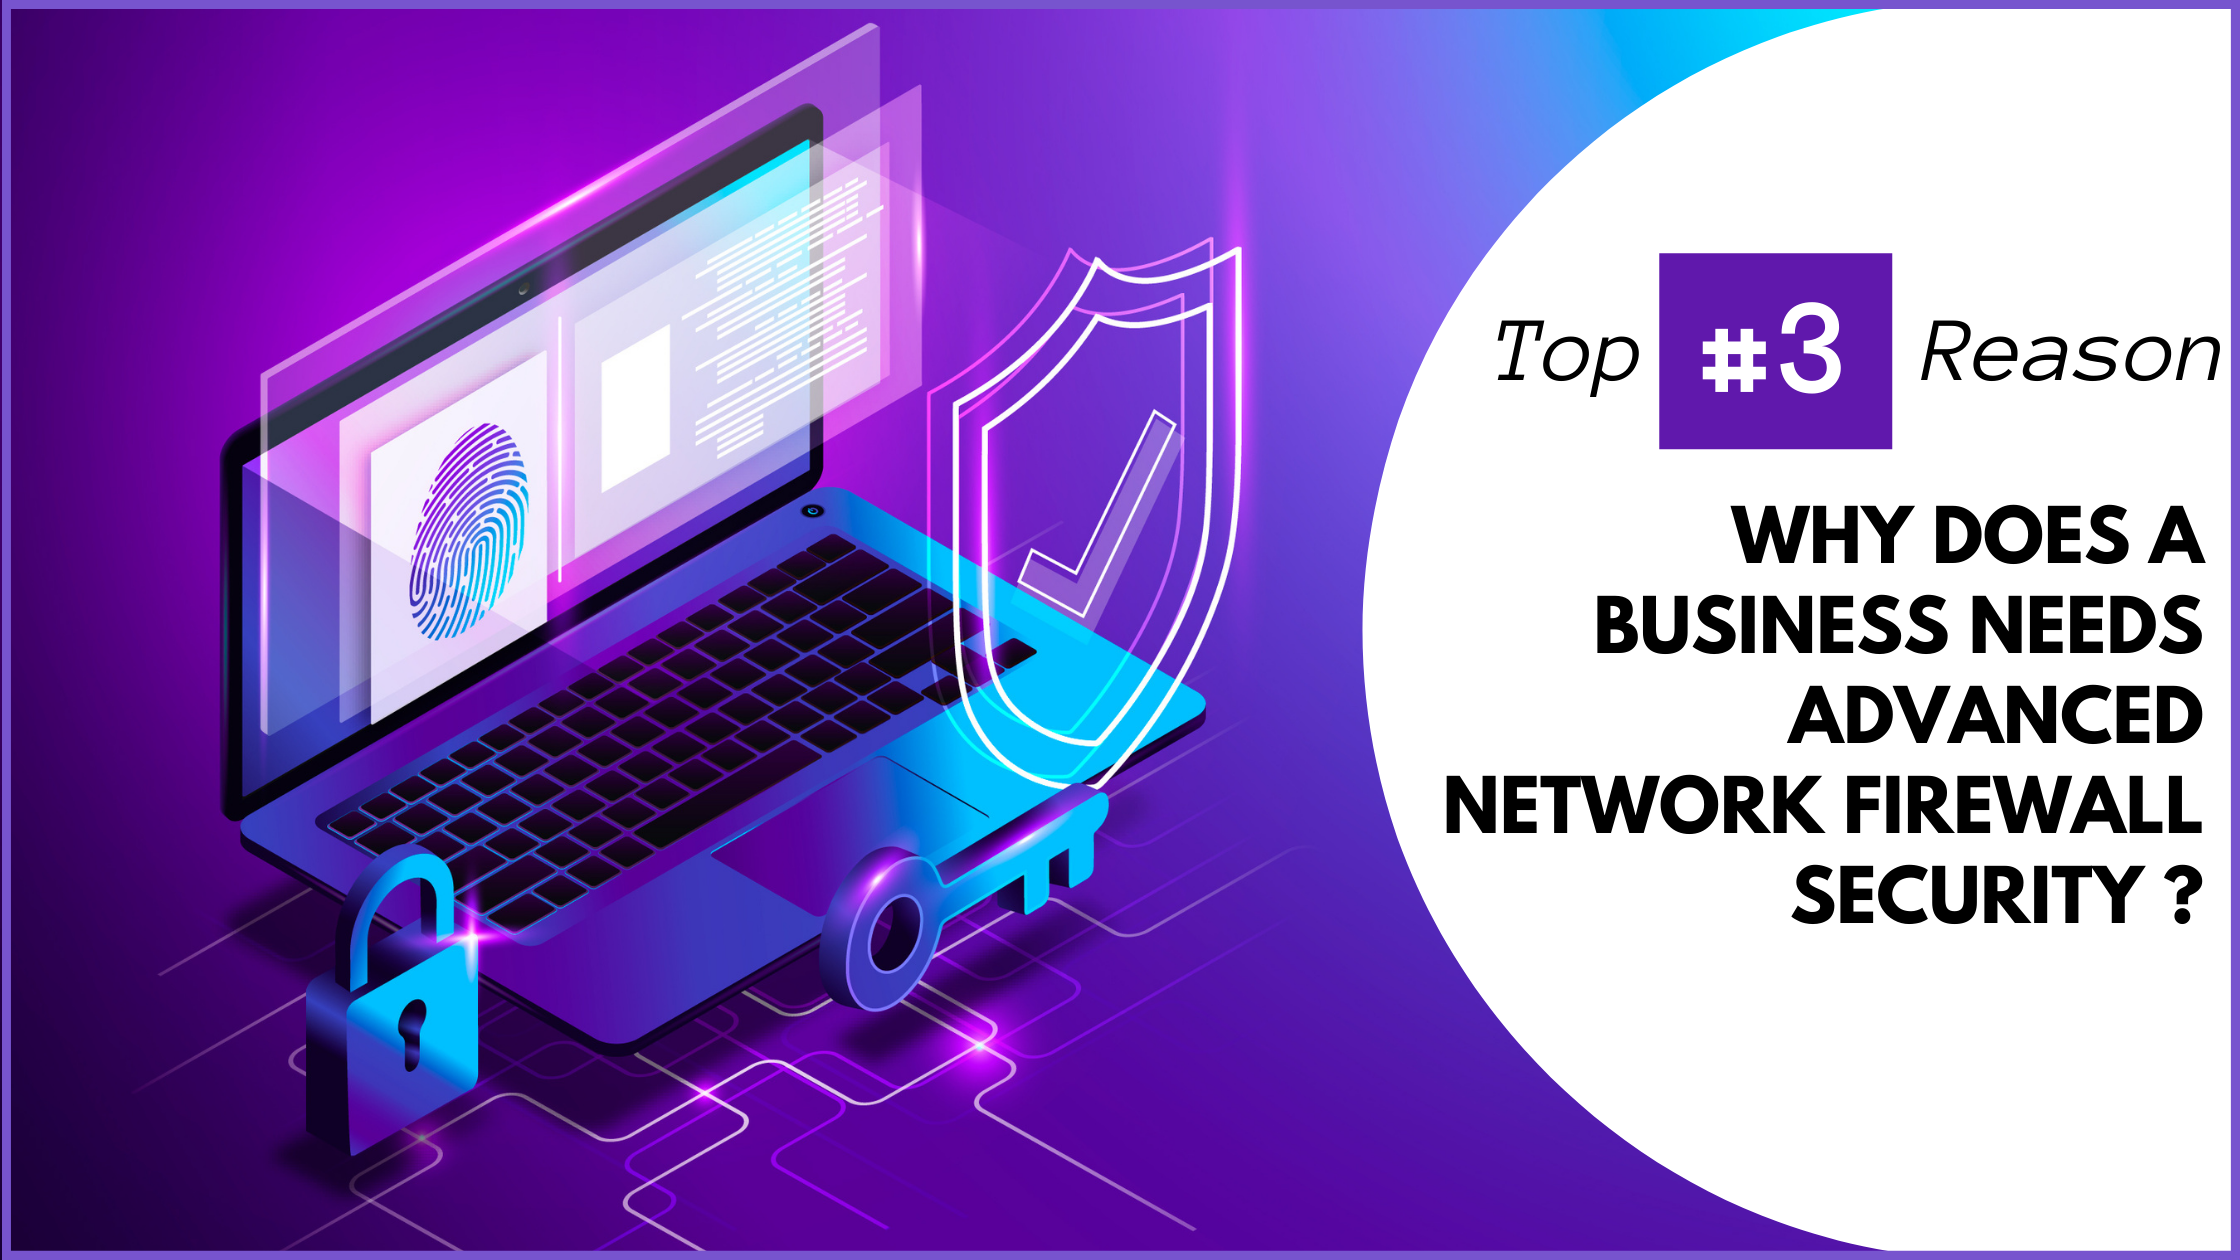 Top 3 Reasons Why a Business Needs Advanced Network Firewall Security